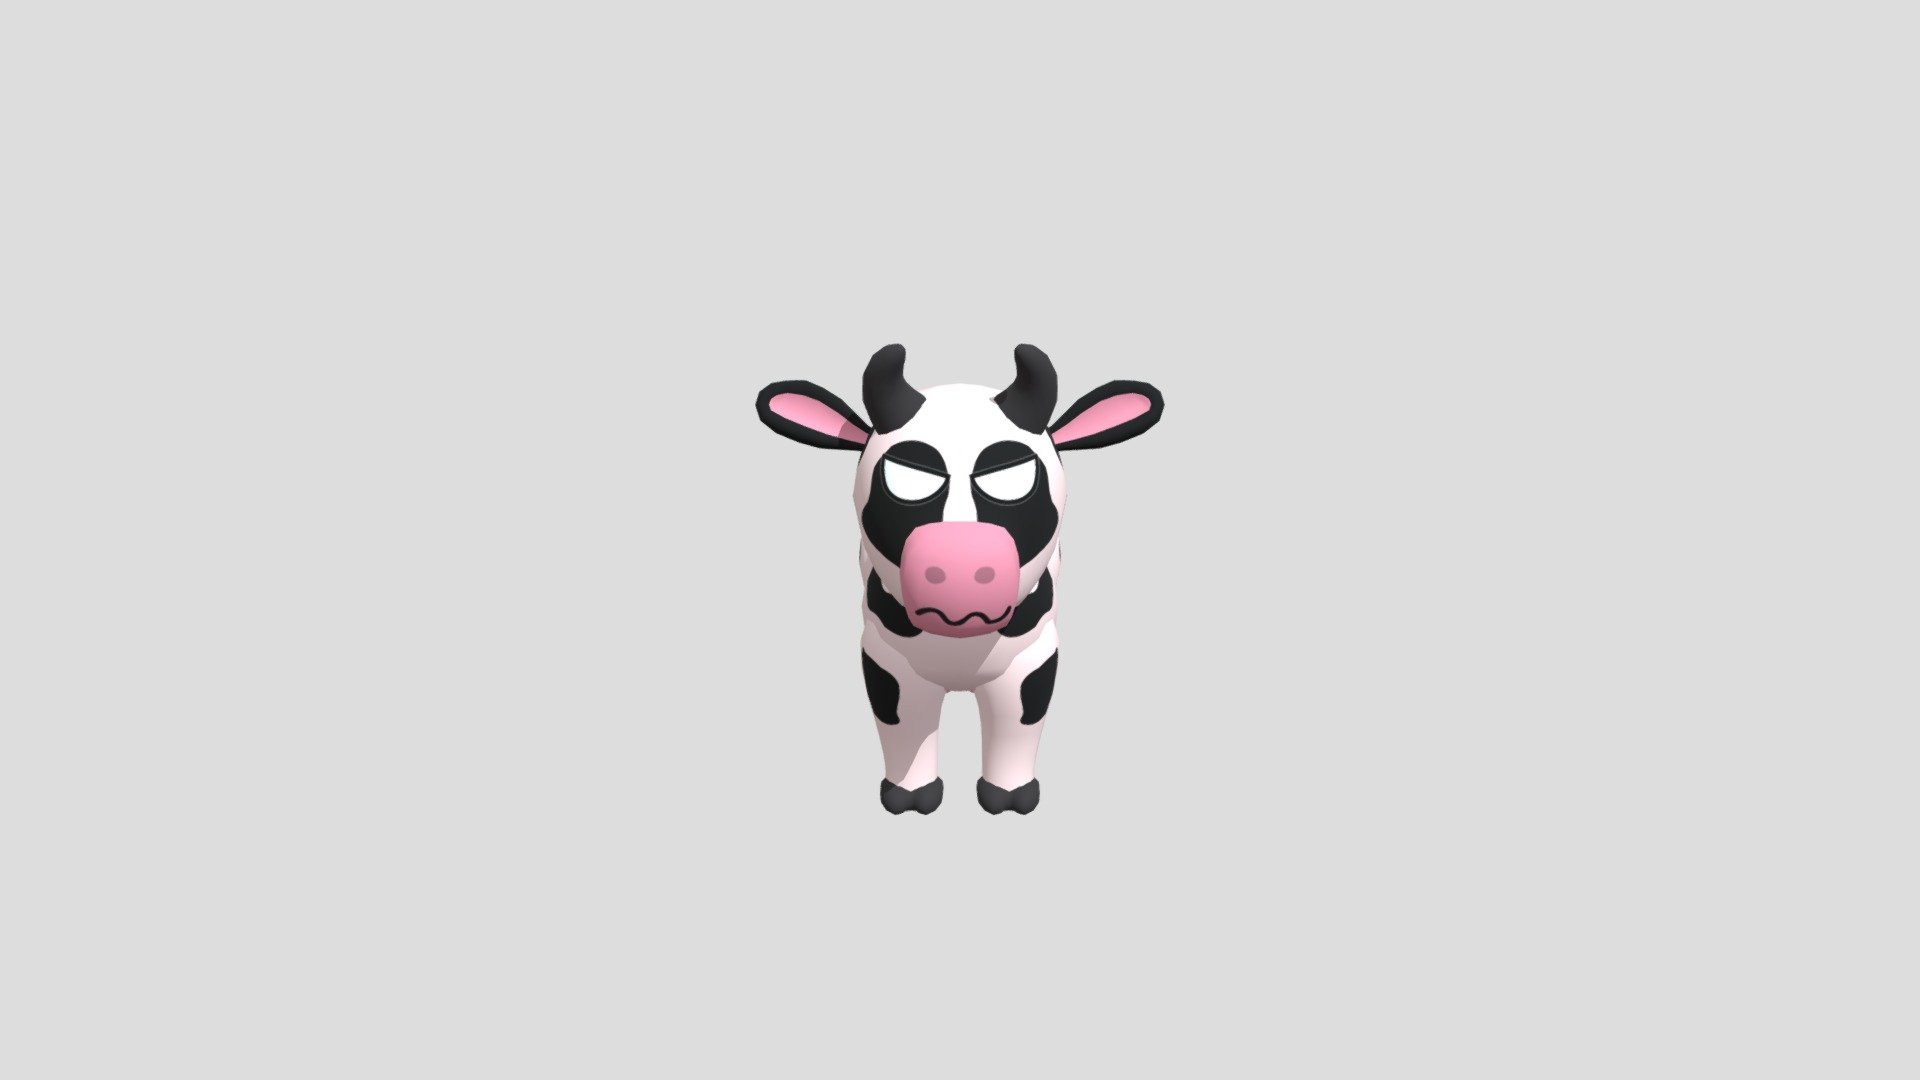 Cute Cow for your game, she is ready to conquer your gaming world and win the hearts of the players with her cuteness.

3318 triangs
2048x texture
15 Animations
15 Eyes
12 Mouths

A variety of eyes and mouths allows you to create more than 15 options
which makes her a very cute model :) - Cute low-poly Cow - 3D model by Karin (@KarinLunga) 3d model